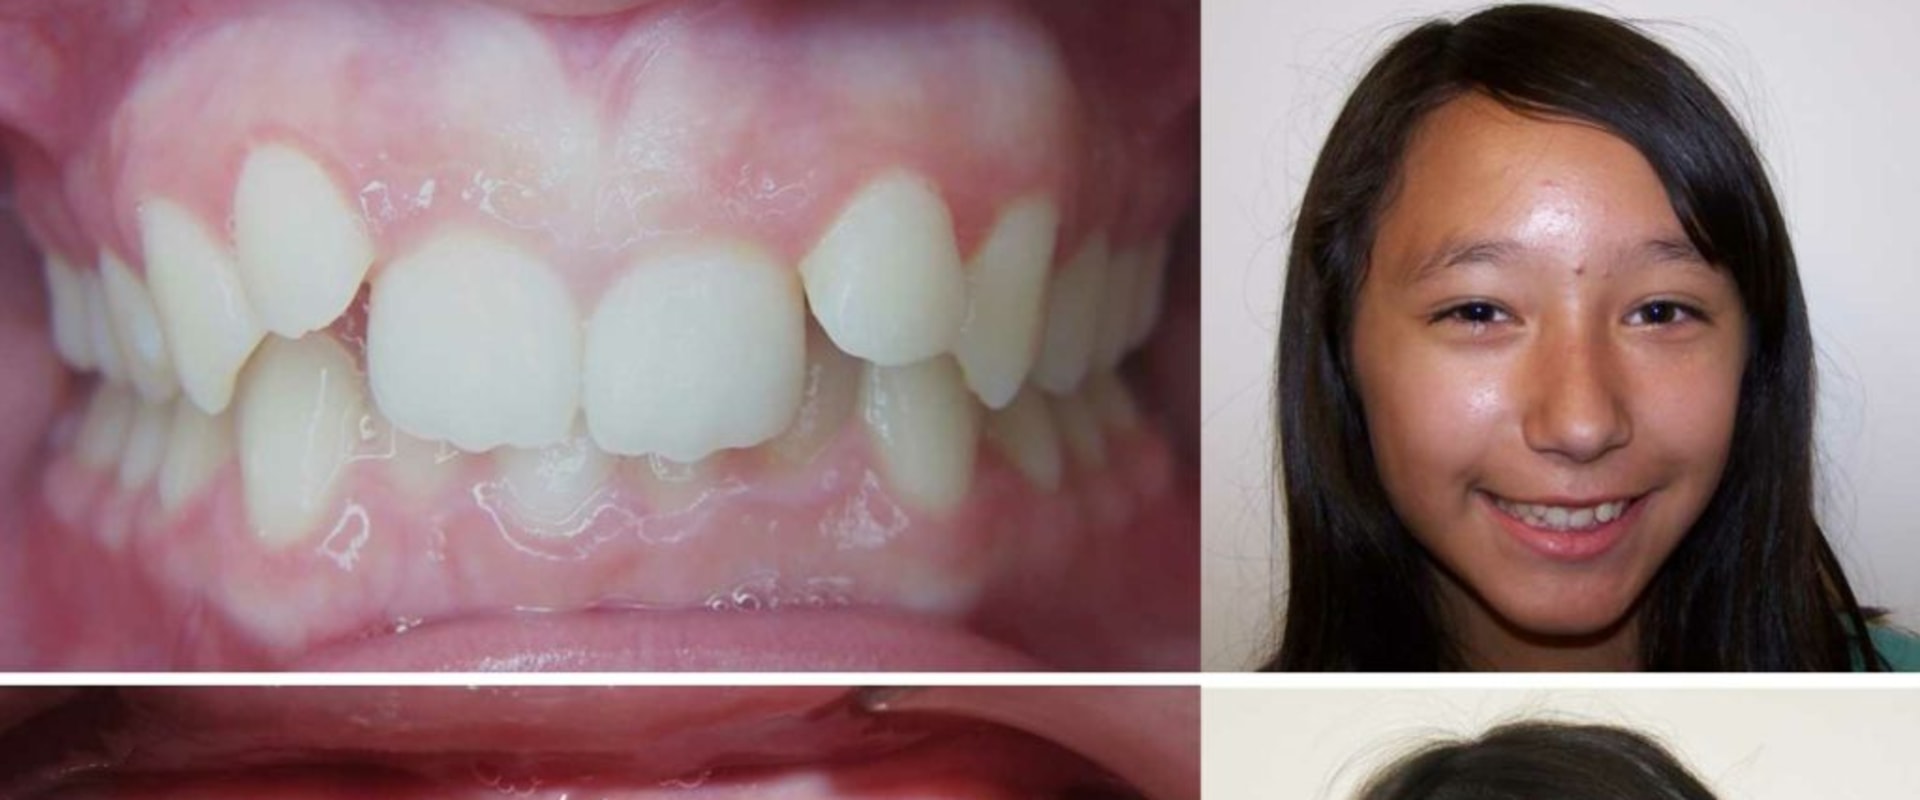 How does invisalign correct overbite?